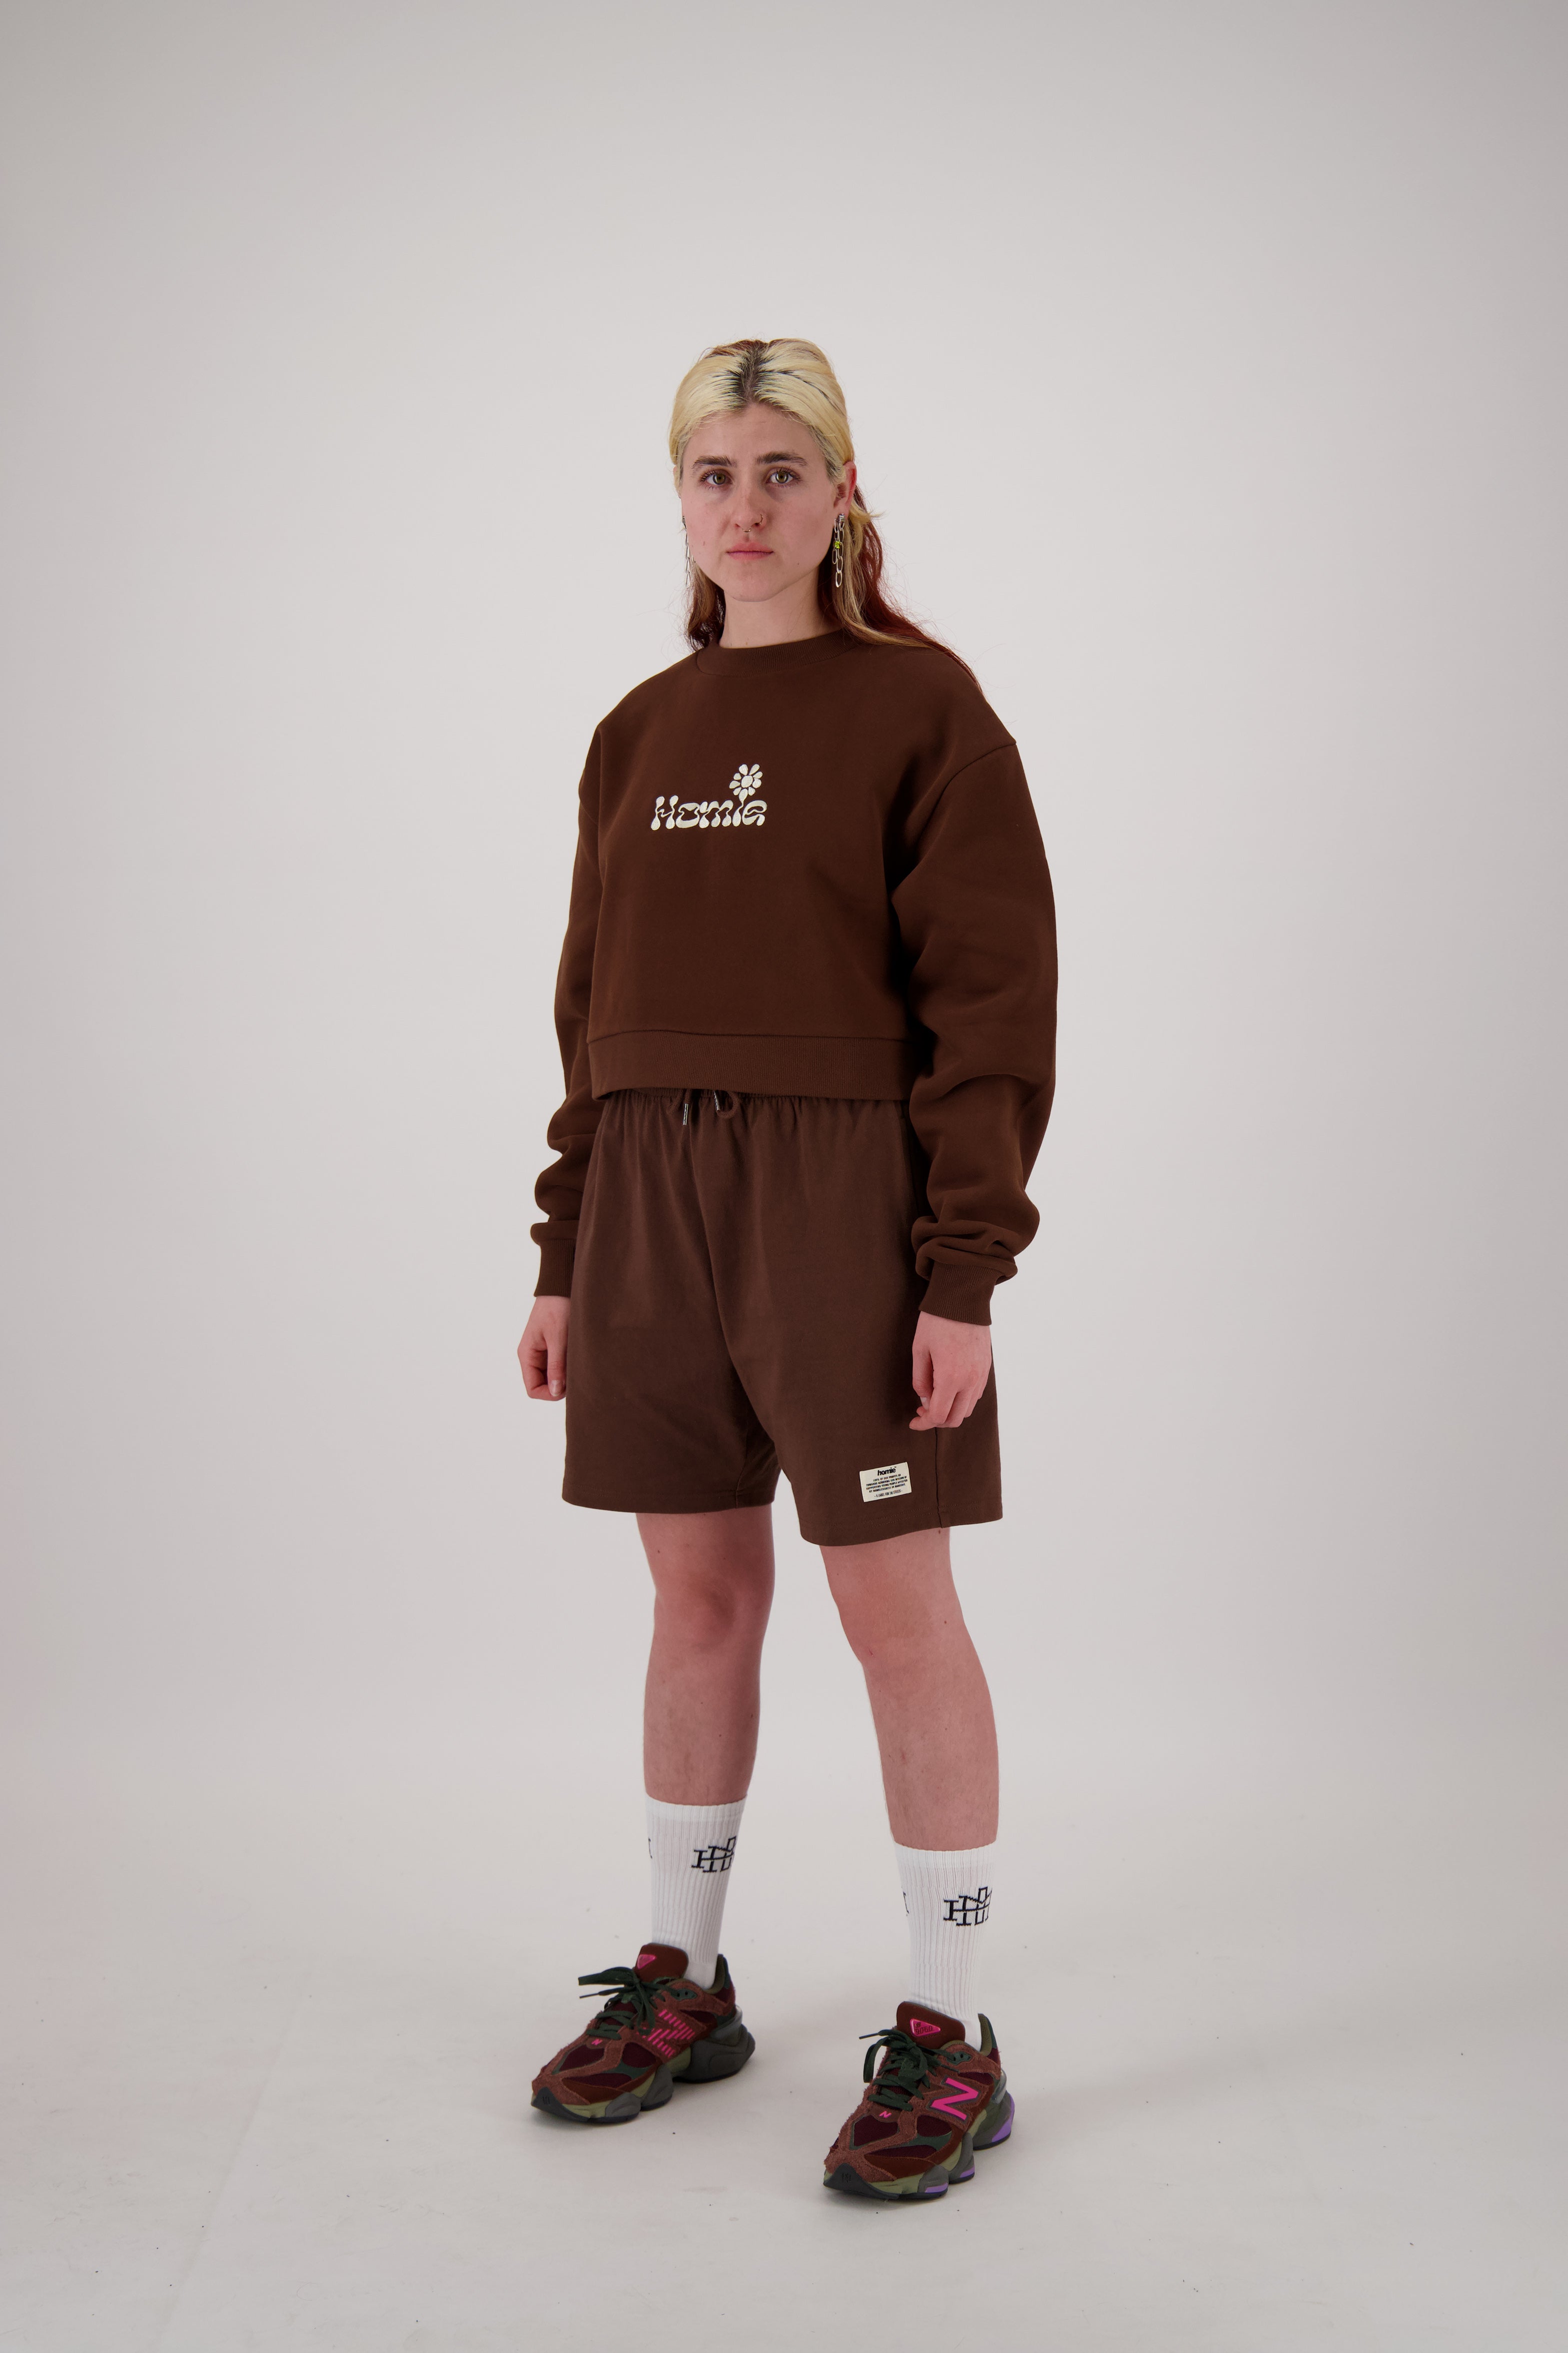 HoMie Cropped Crew – Chocolate